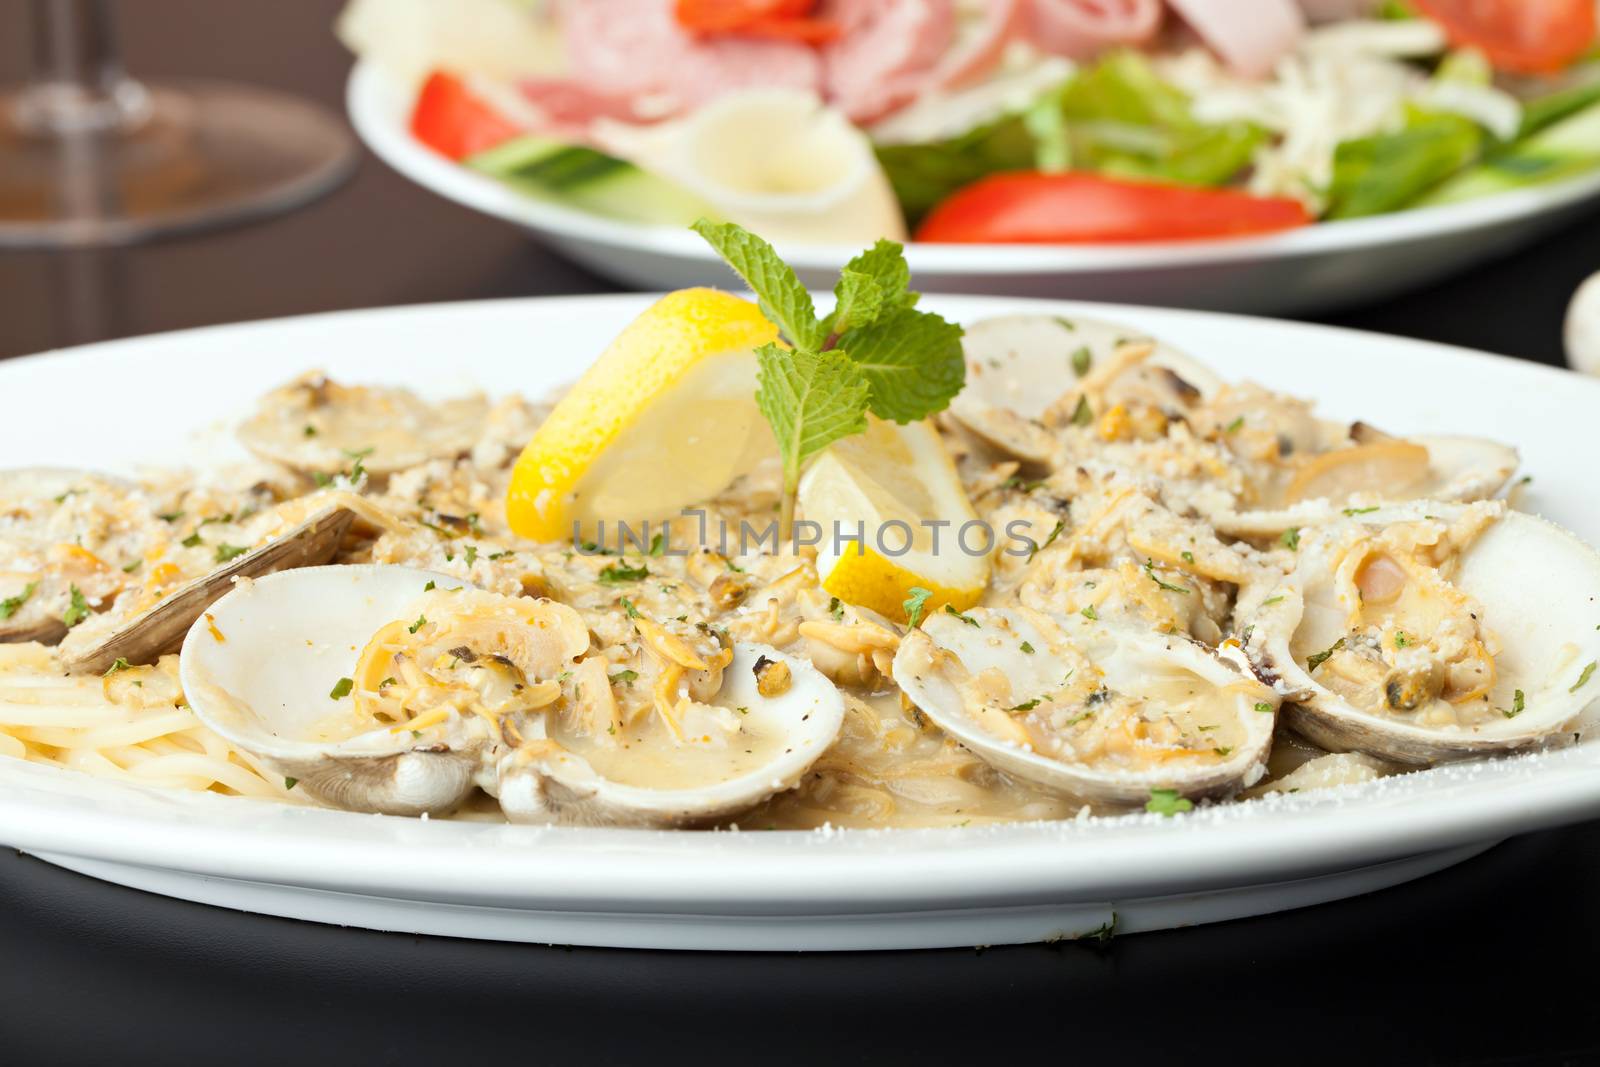 Italian pasta dish with fresh clams over pasta with herbs and cheese.  Shallow depth of field.